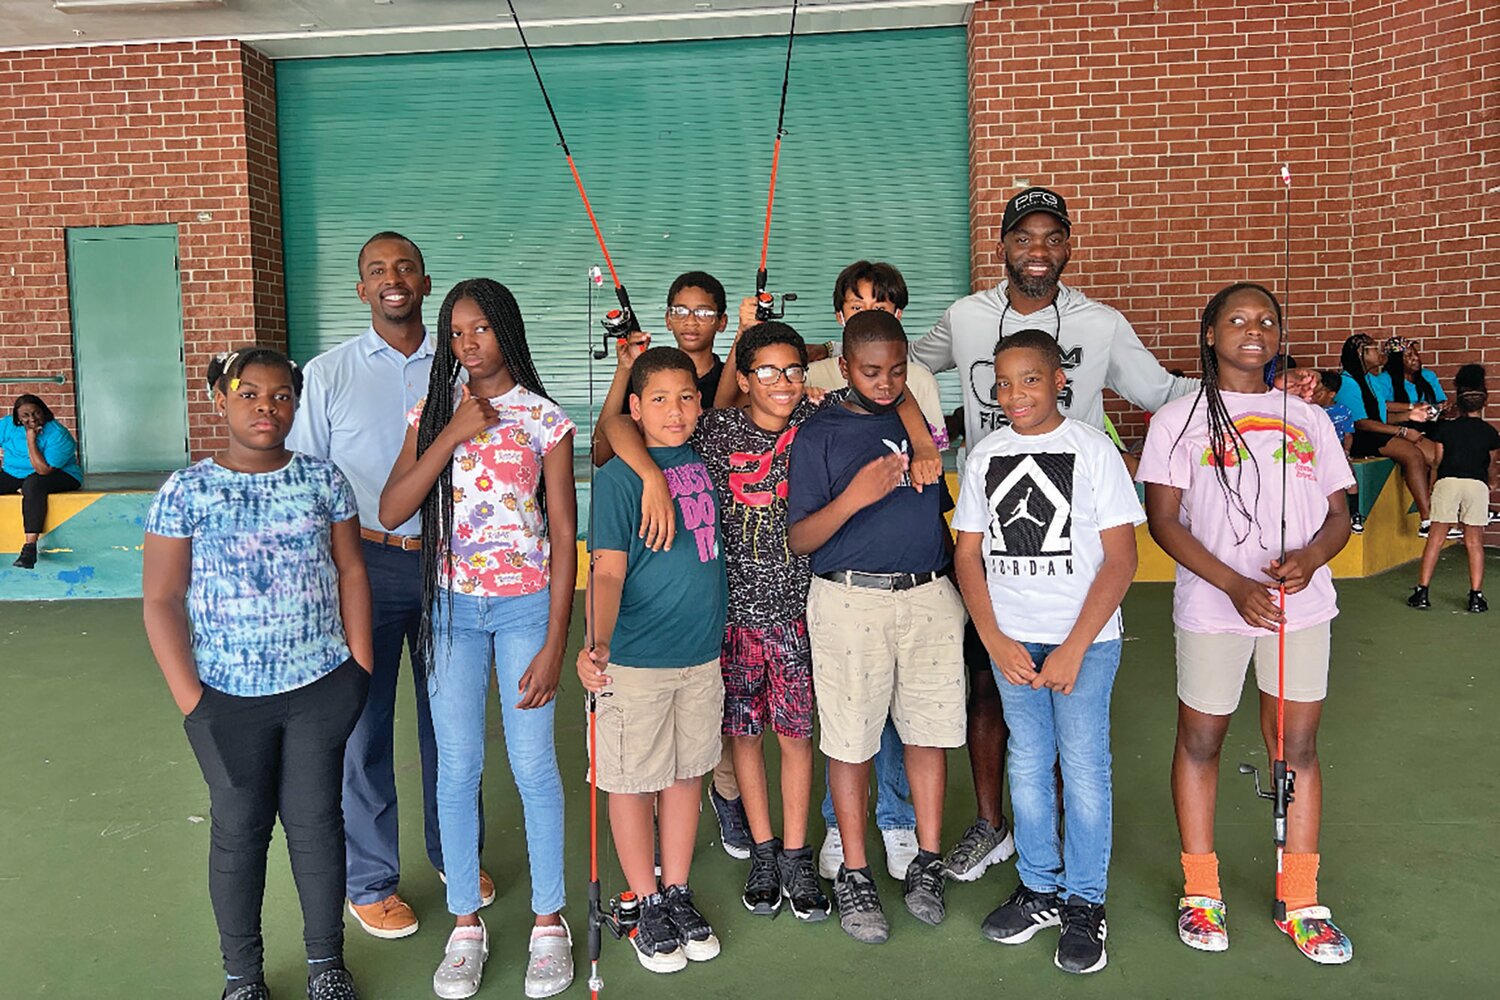 Recently, U.S. Sugar Community Relations Director Brannan Thomas (back row far left) joined Jeffery Willis, known as Muck City Angler (back row far right) in the MCA youth fishing camp at Pioneer Park Elementary School in Belle Glade.